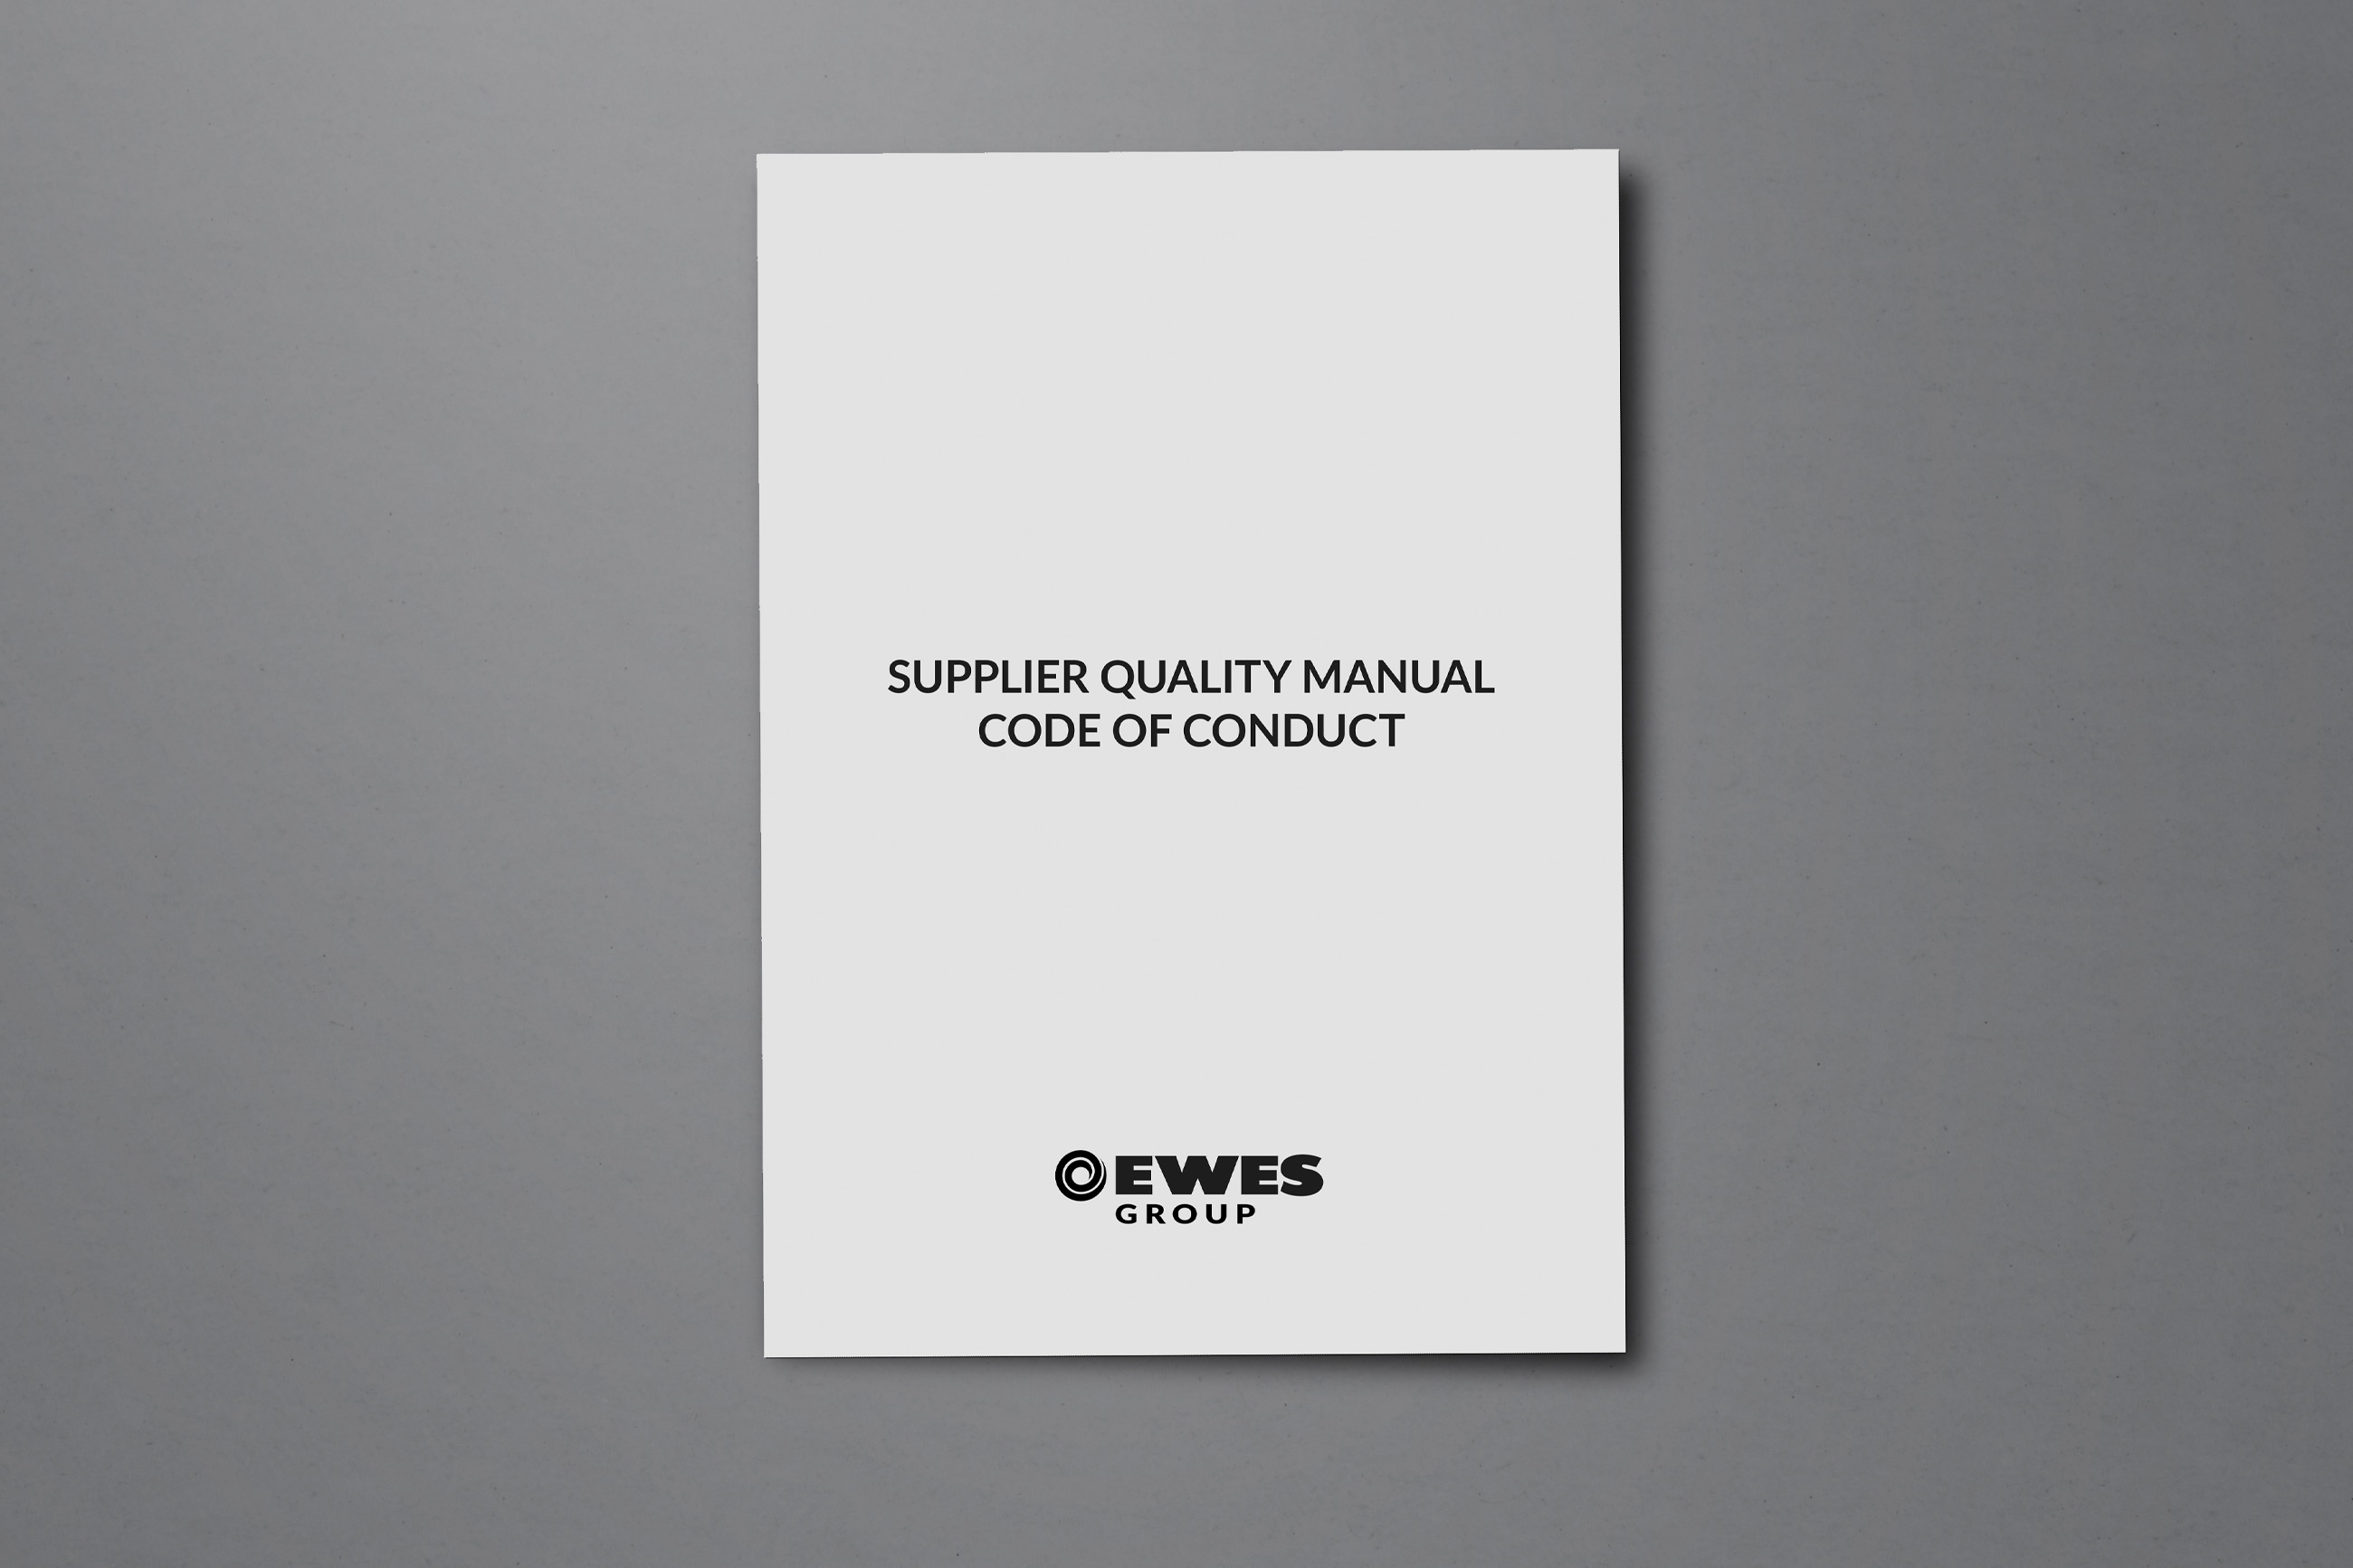 EWES Supplier quality manual code of conduct